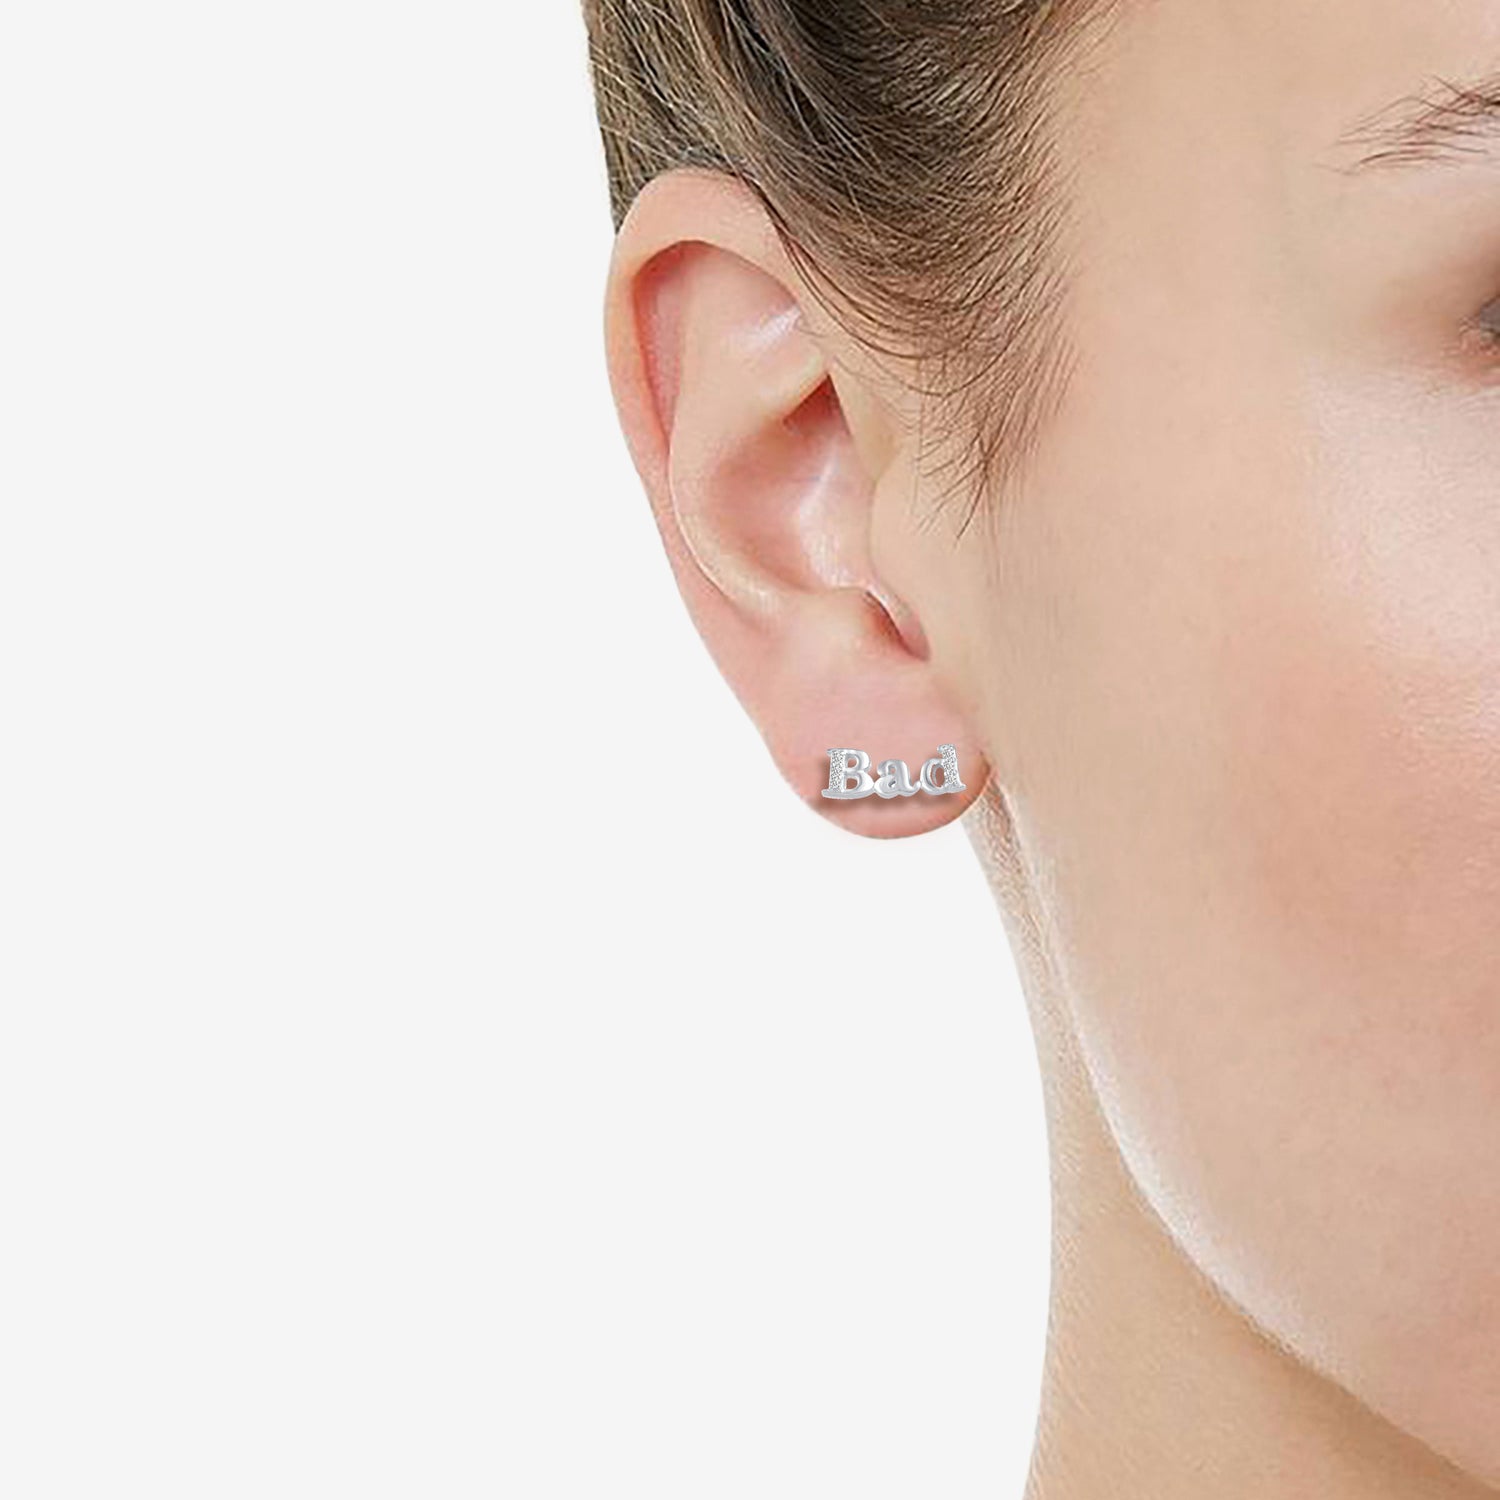 Bad Bitch Stud Earrings with 1/20 Ctw Natural Diamonds set in 925 Sterling Silver